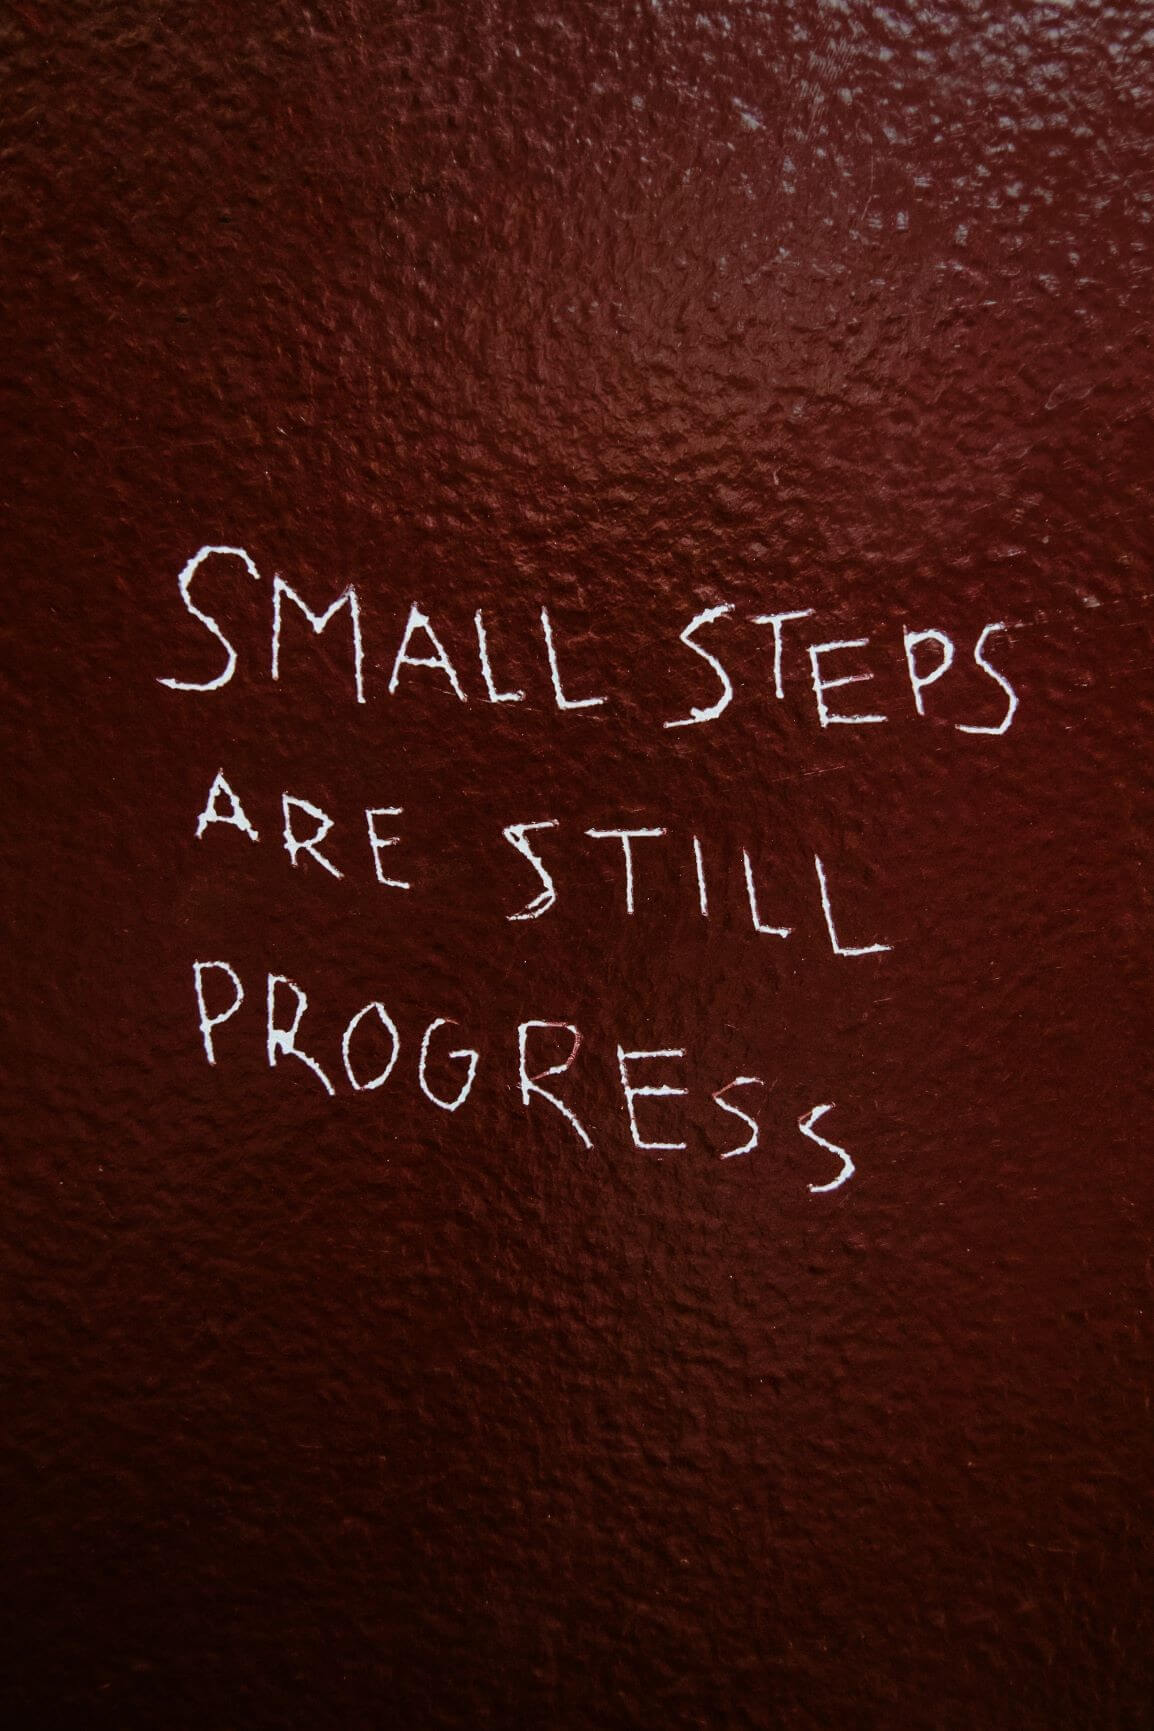 Take some small steps to better wellbeing